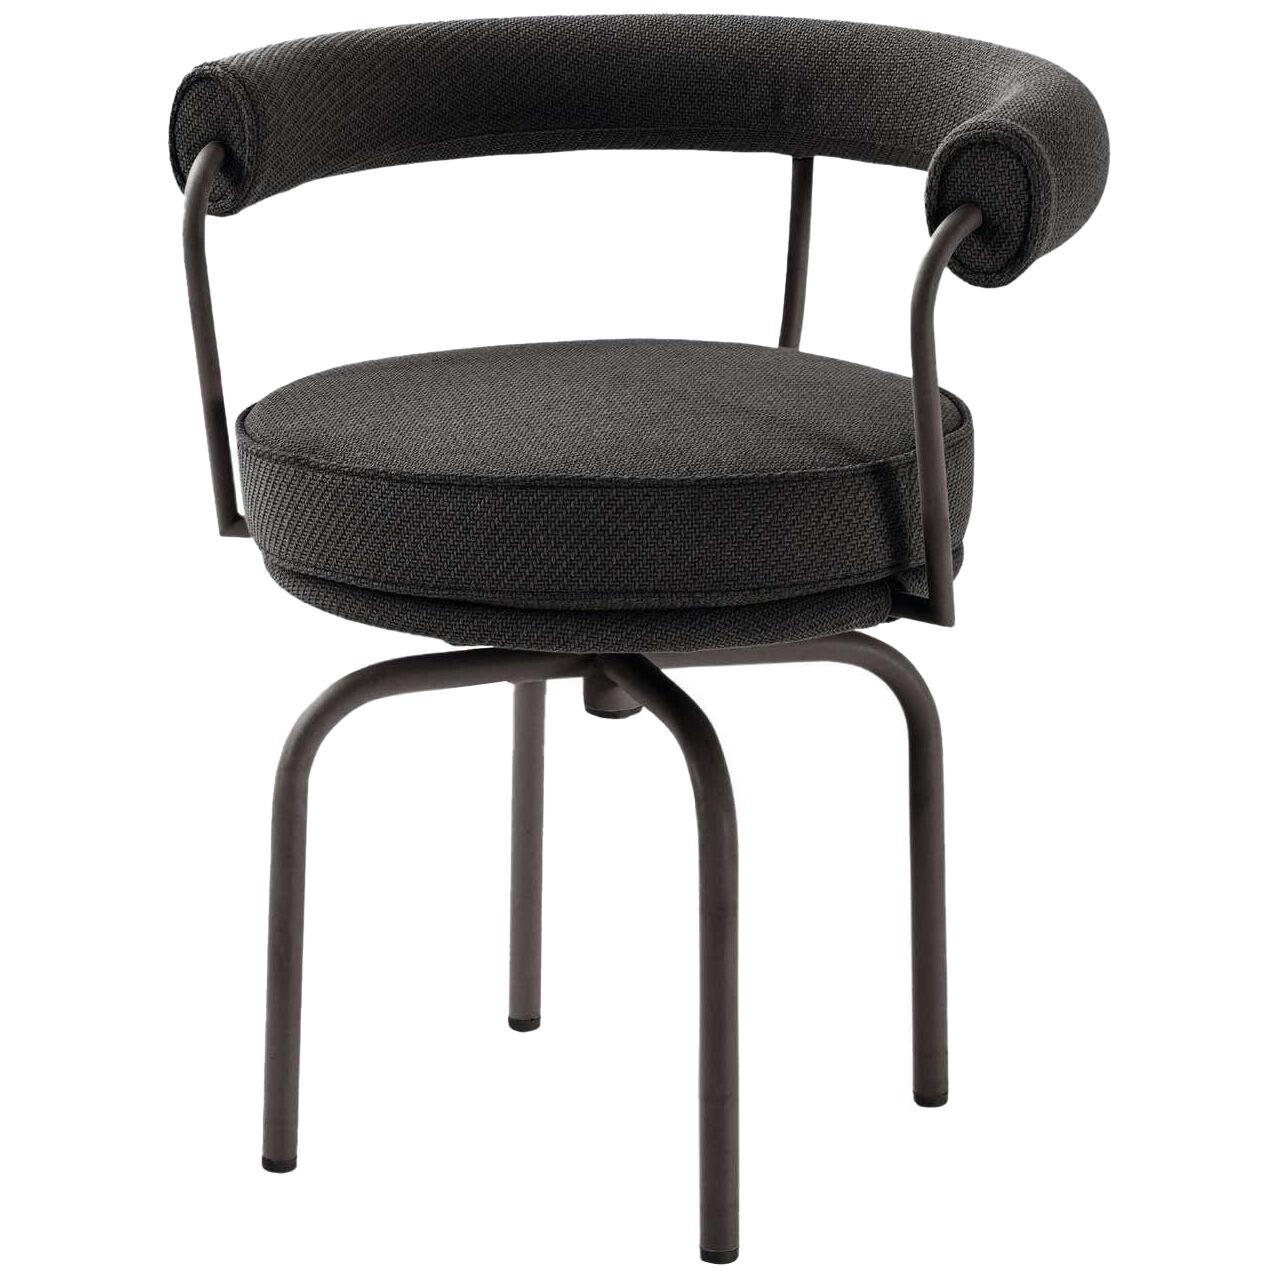 Charlotte Perriand LC7 Outdoors Textured Black Chair by Cassina